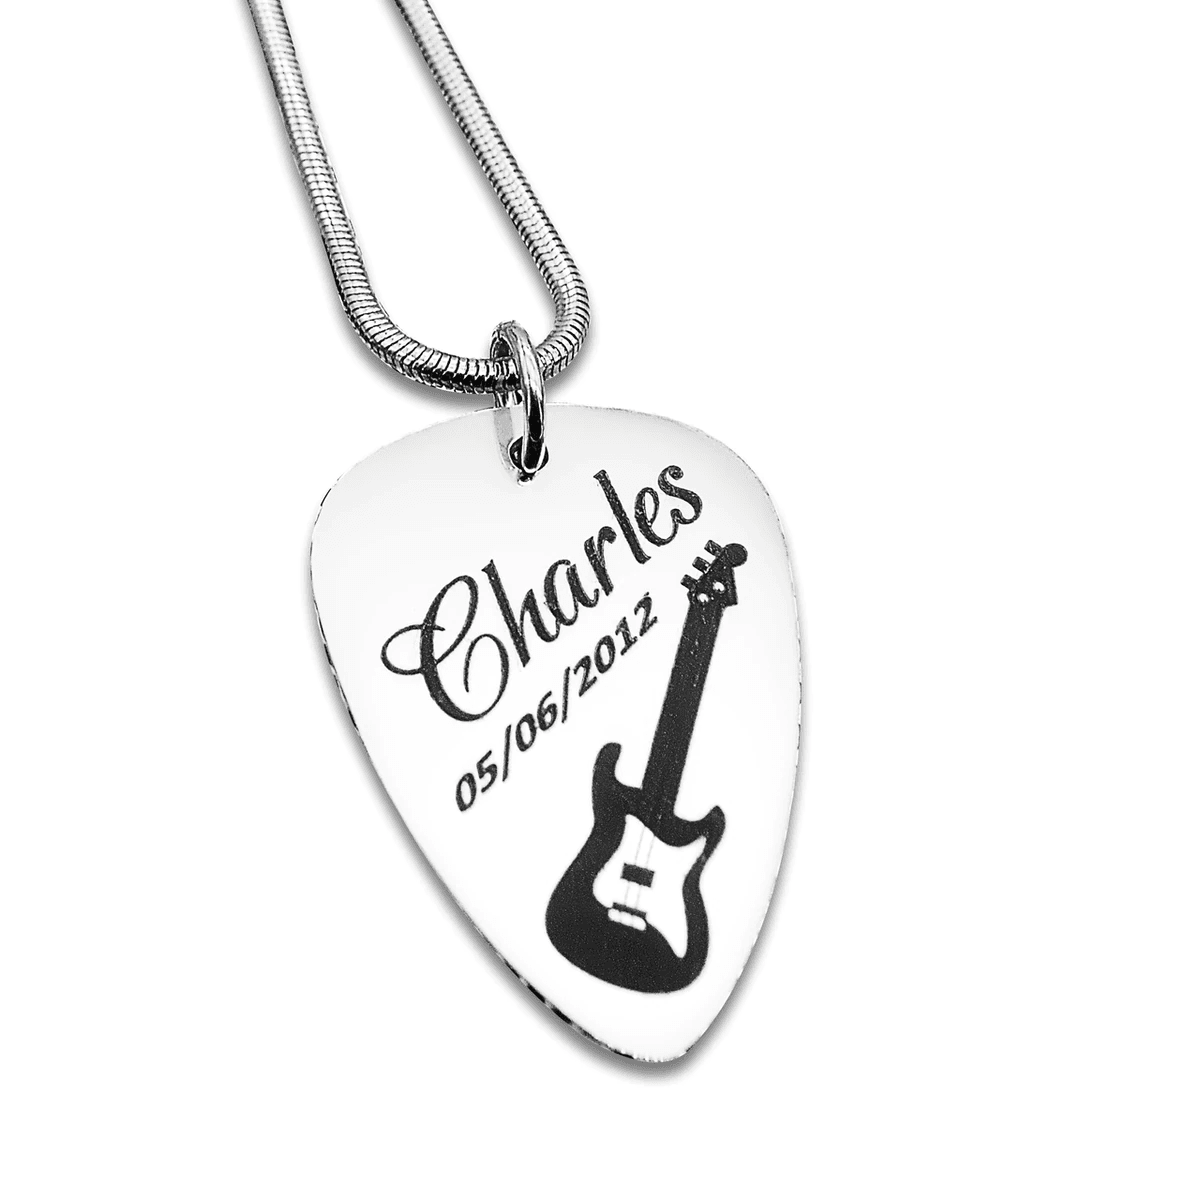 Guitar Pick Name Necklace - Name Necklaces by Belle Fever